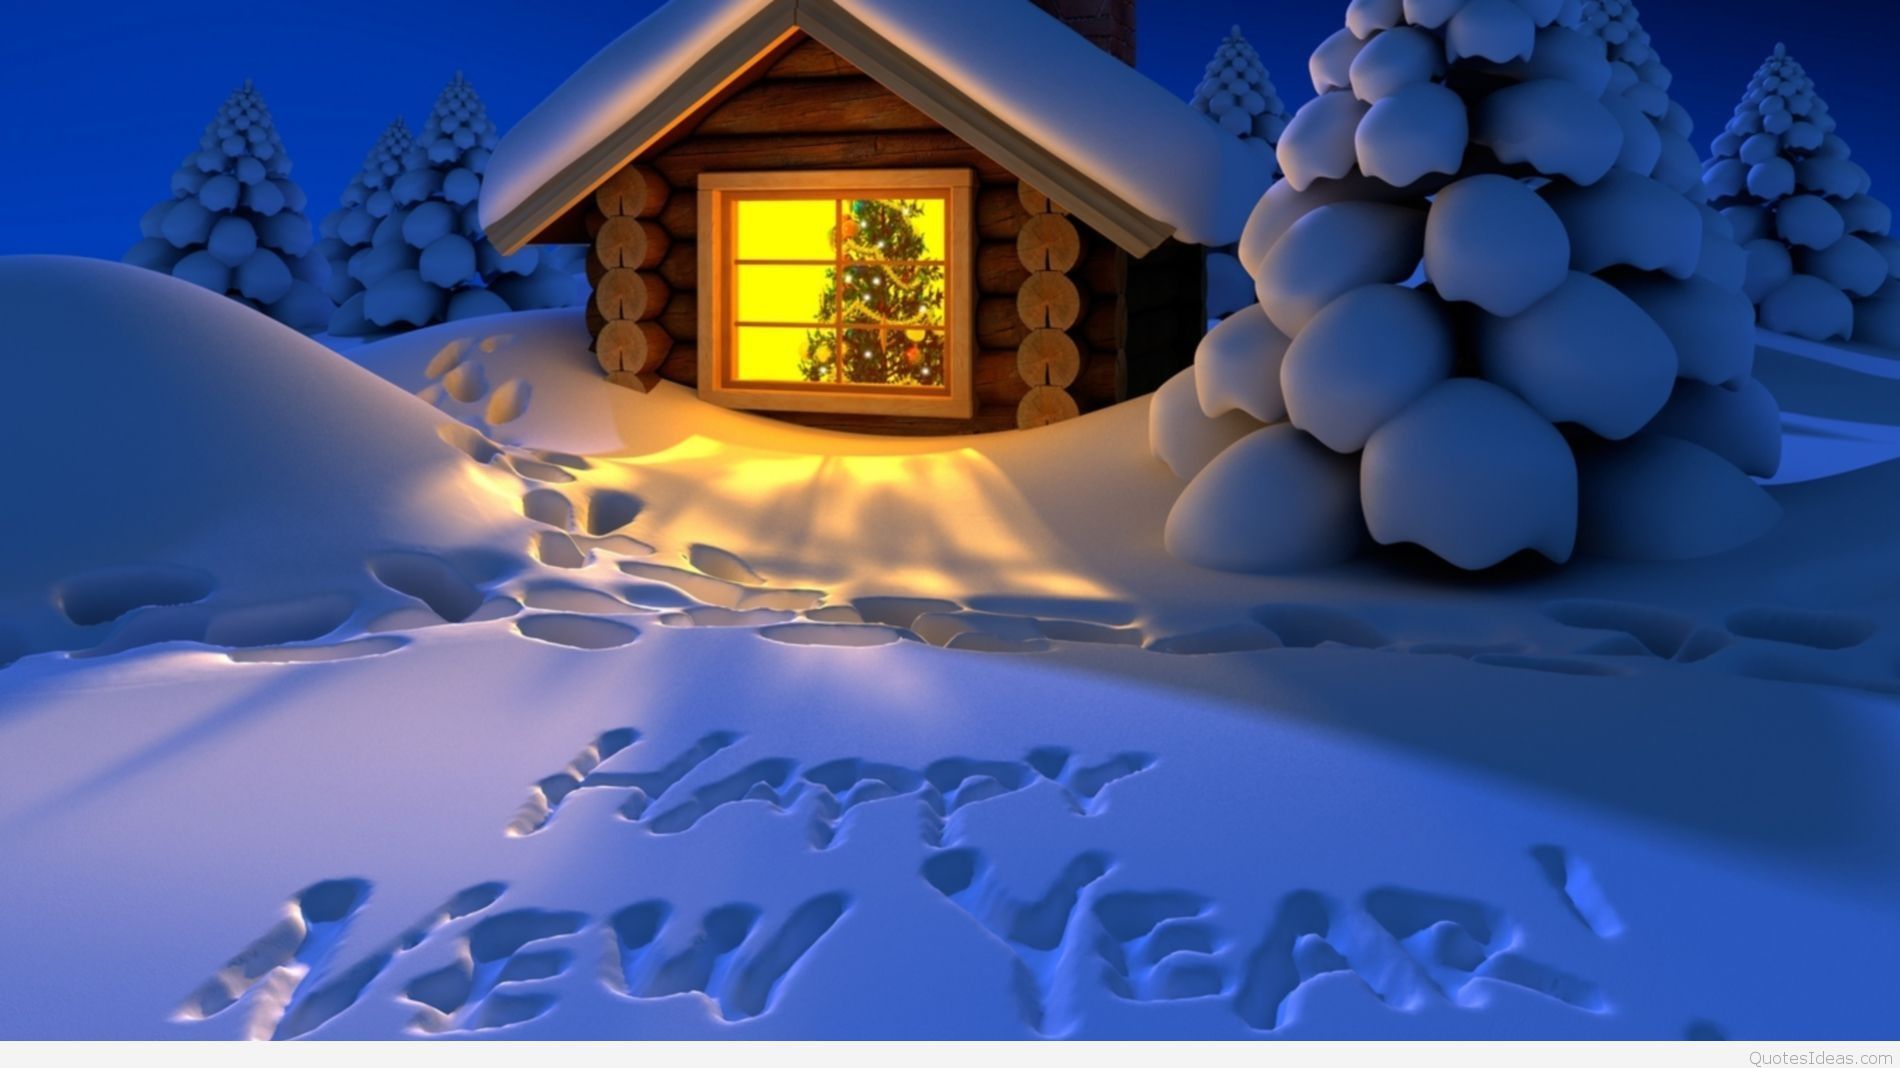 Happy new year best Christian wishes, quotes cards messages